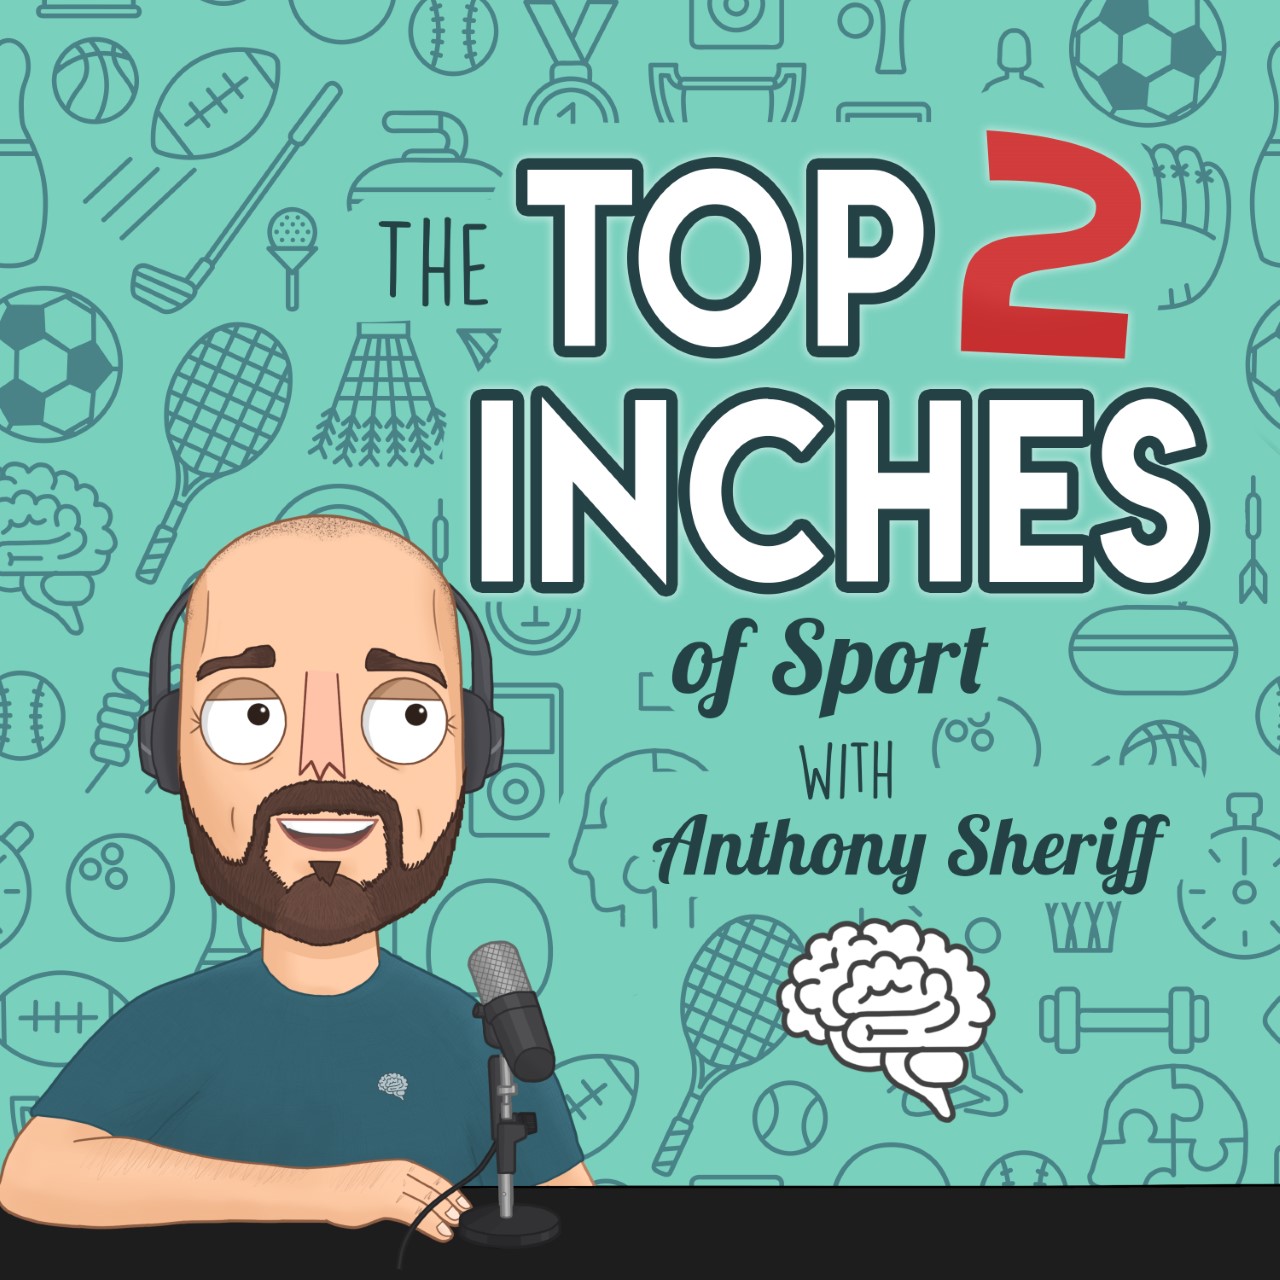 Top 2 Inches of Sport